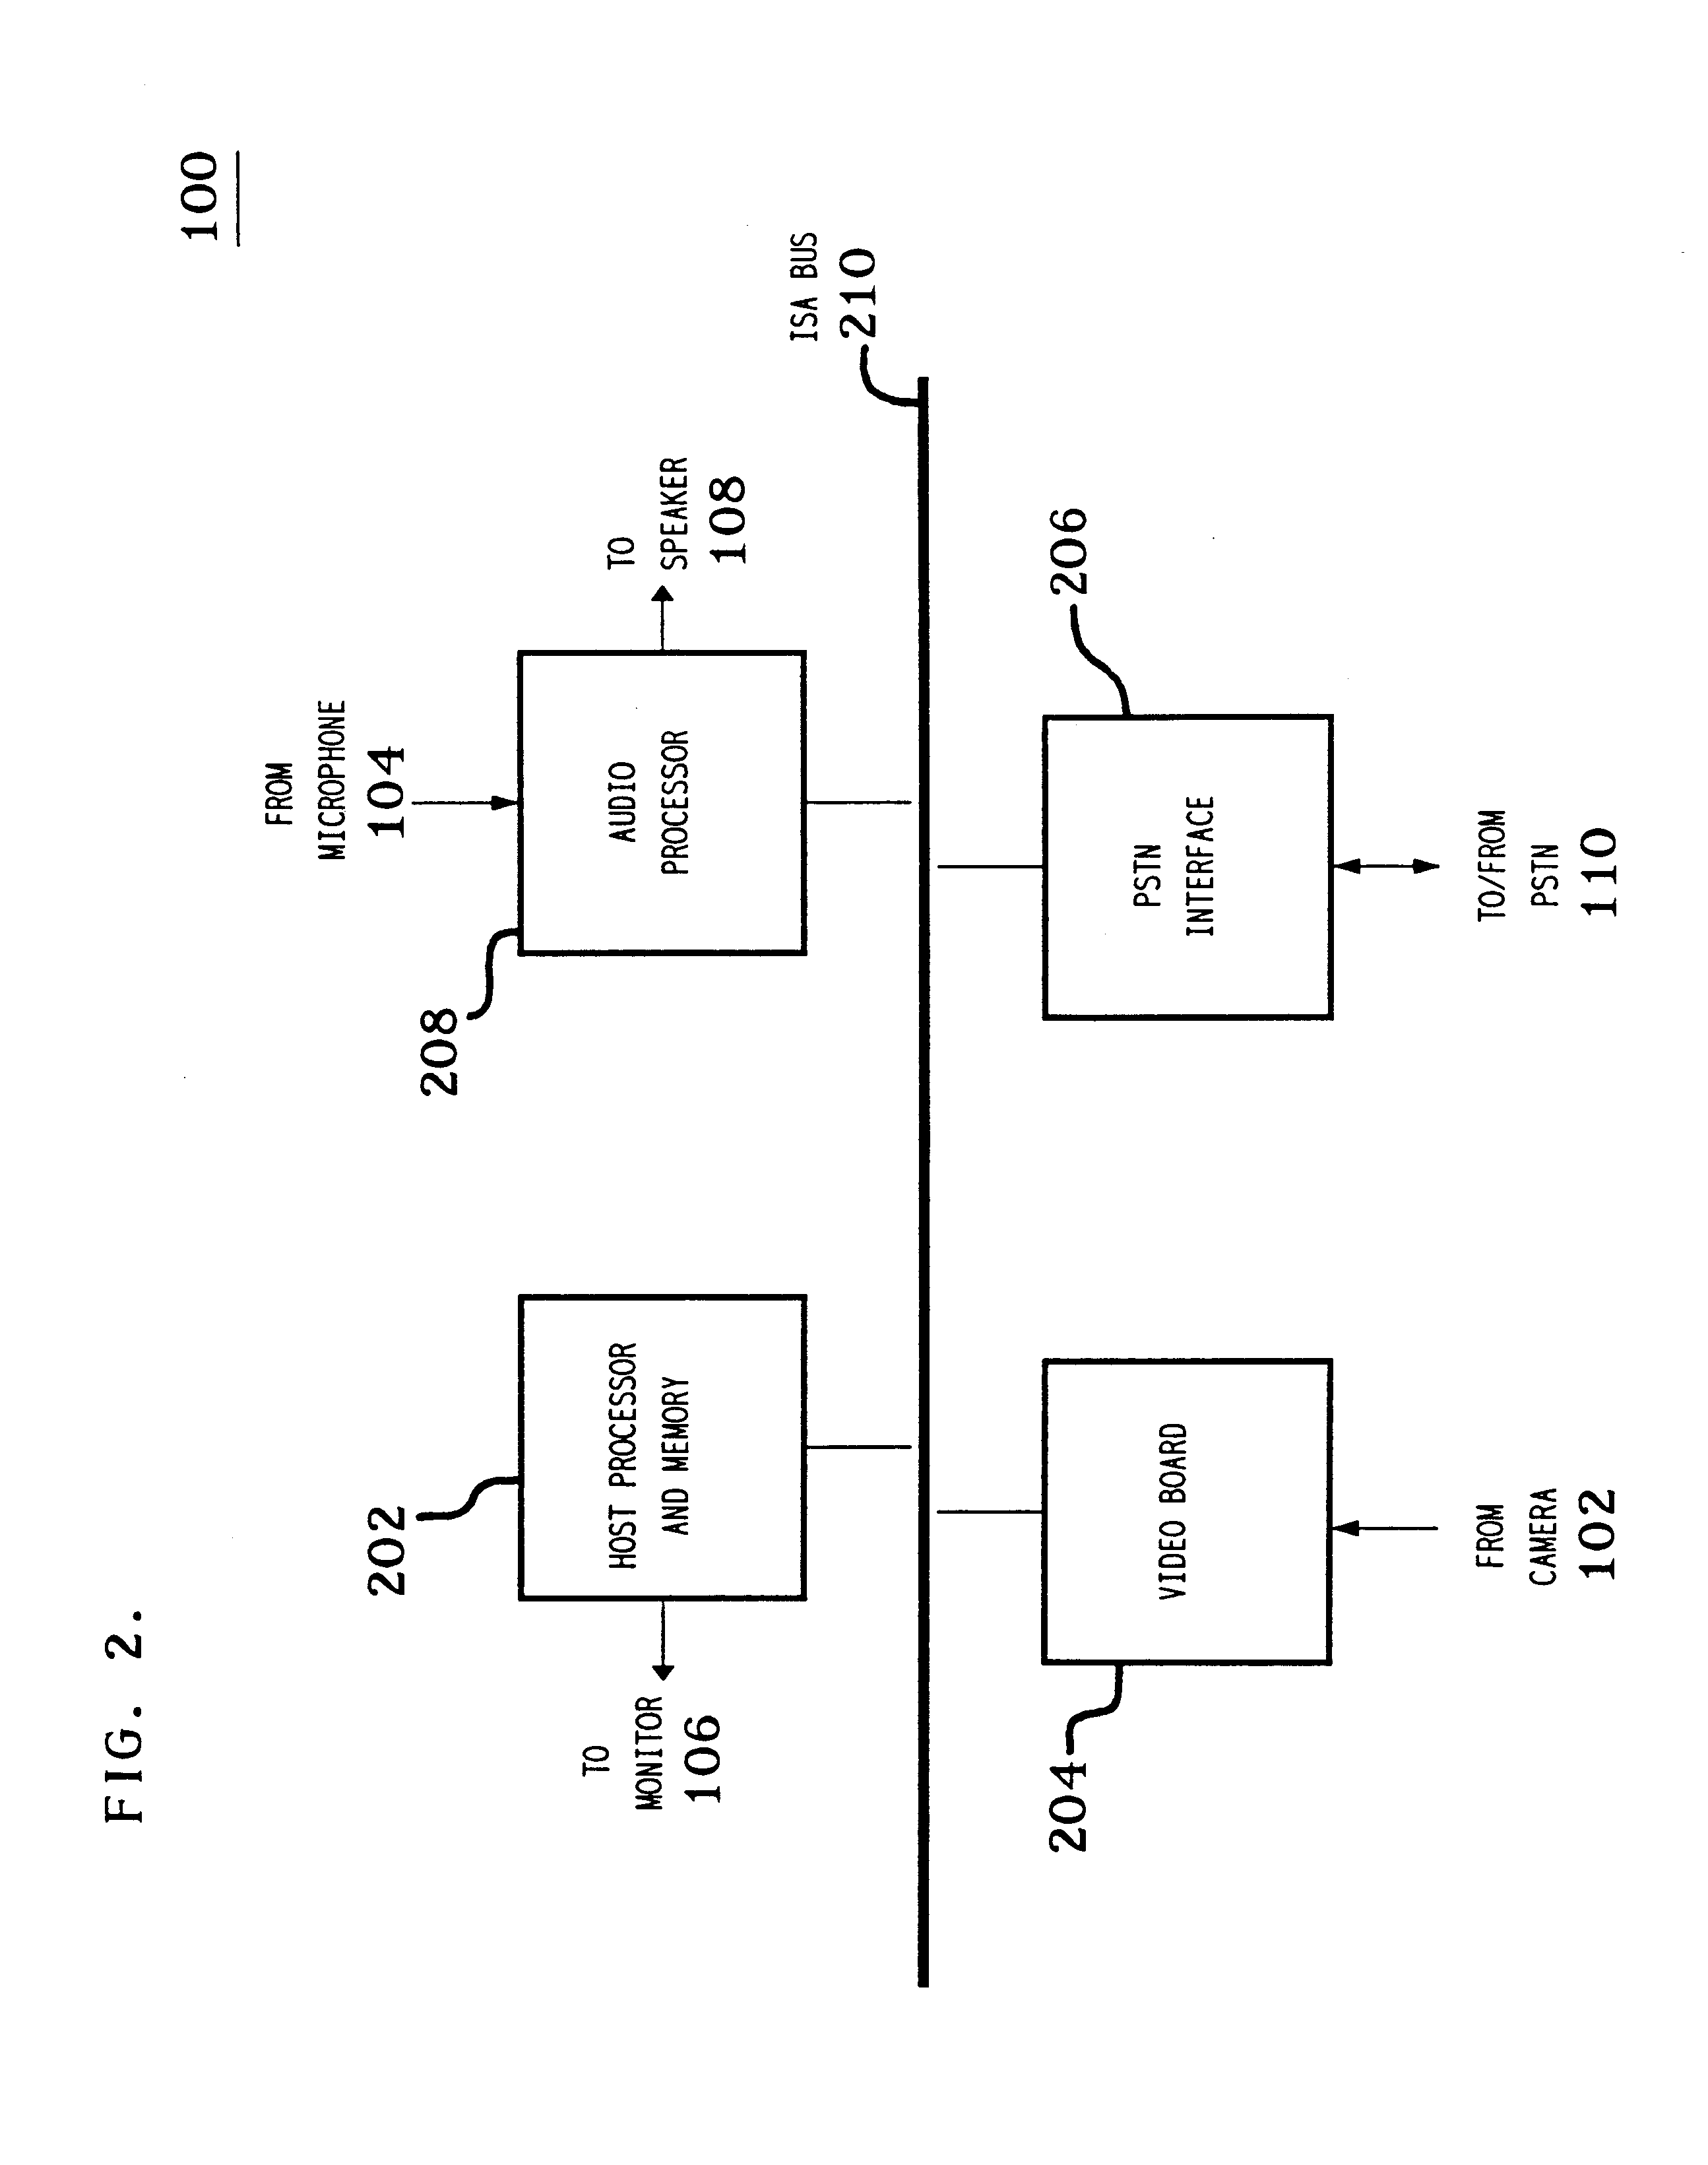 Using numbers of non-zero quantized transform signals and signal differences to determine when to encode video signals using inter-frame or intra-frame encoding